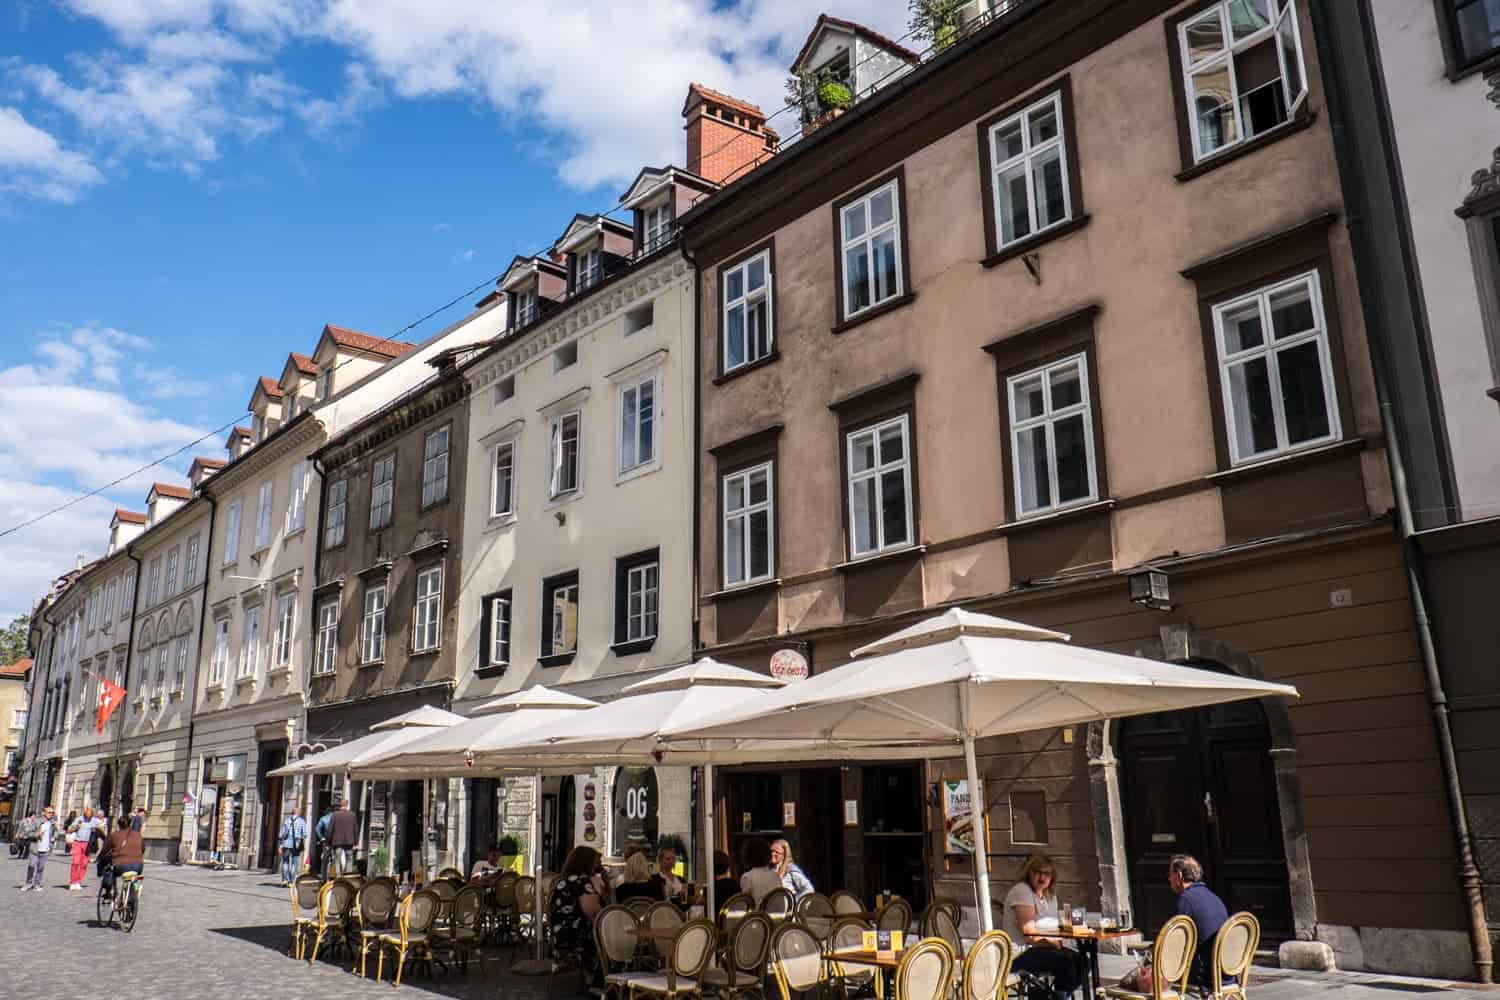 Cafes and stores on Ljubljana Old Town streets in the Capital of Slovenia